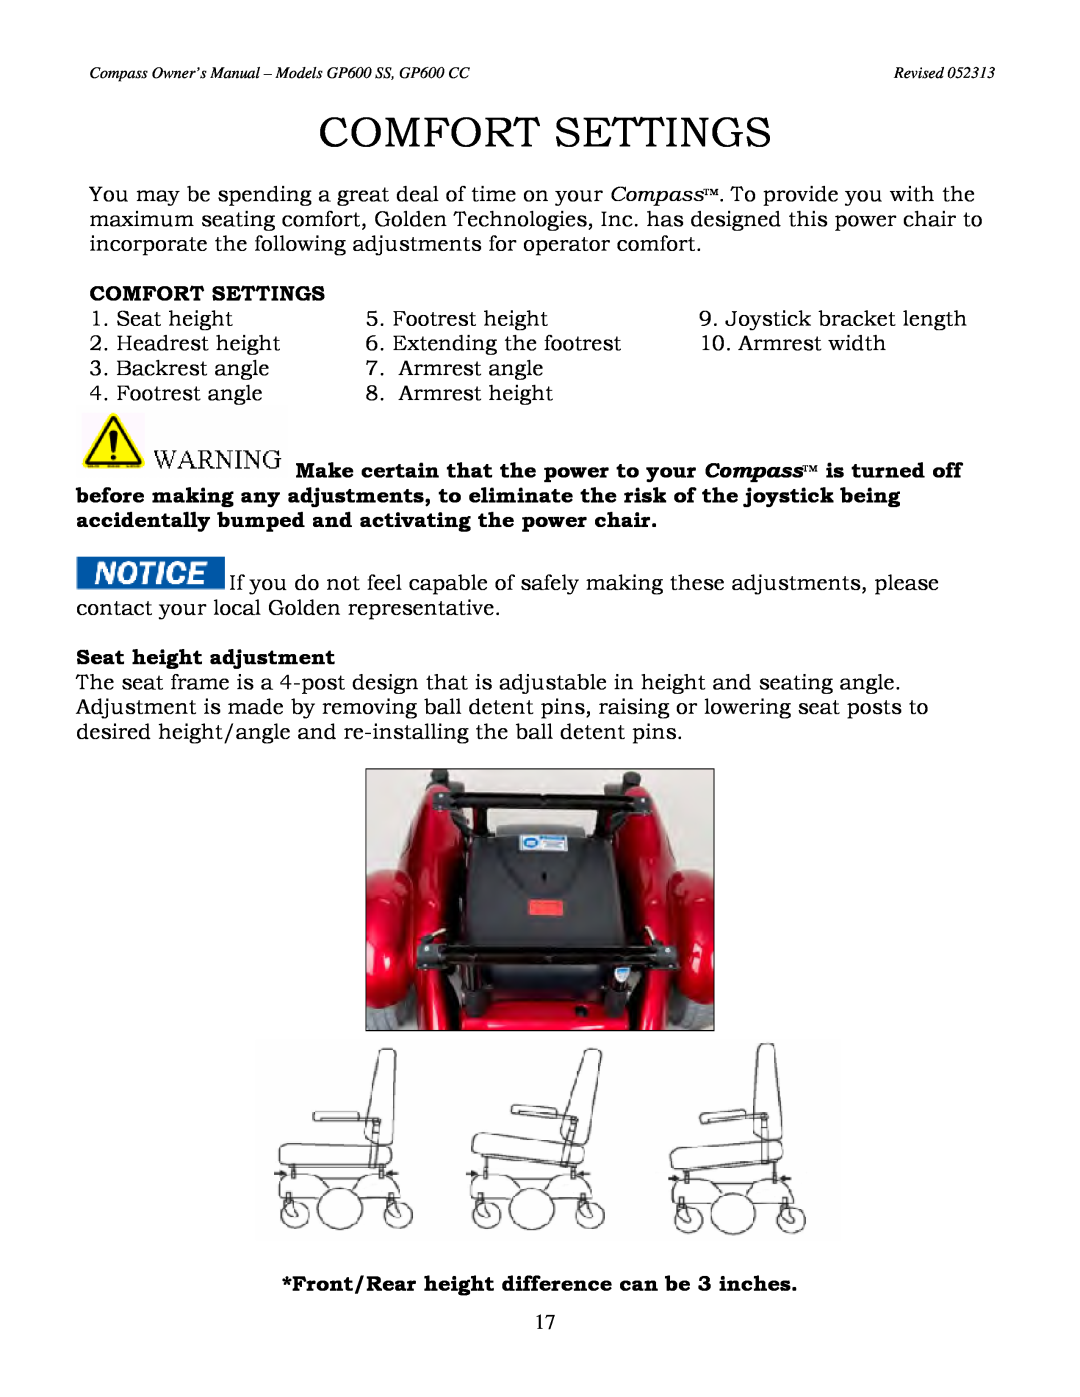 Golden Technologies GP600 CC Comfort Settings, Seat height adjustment, Front/Rear height difference can be 3 inches 